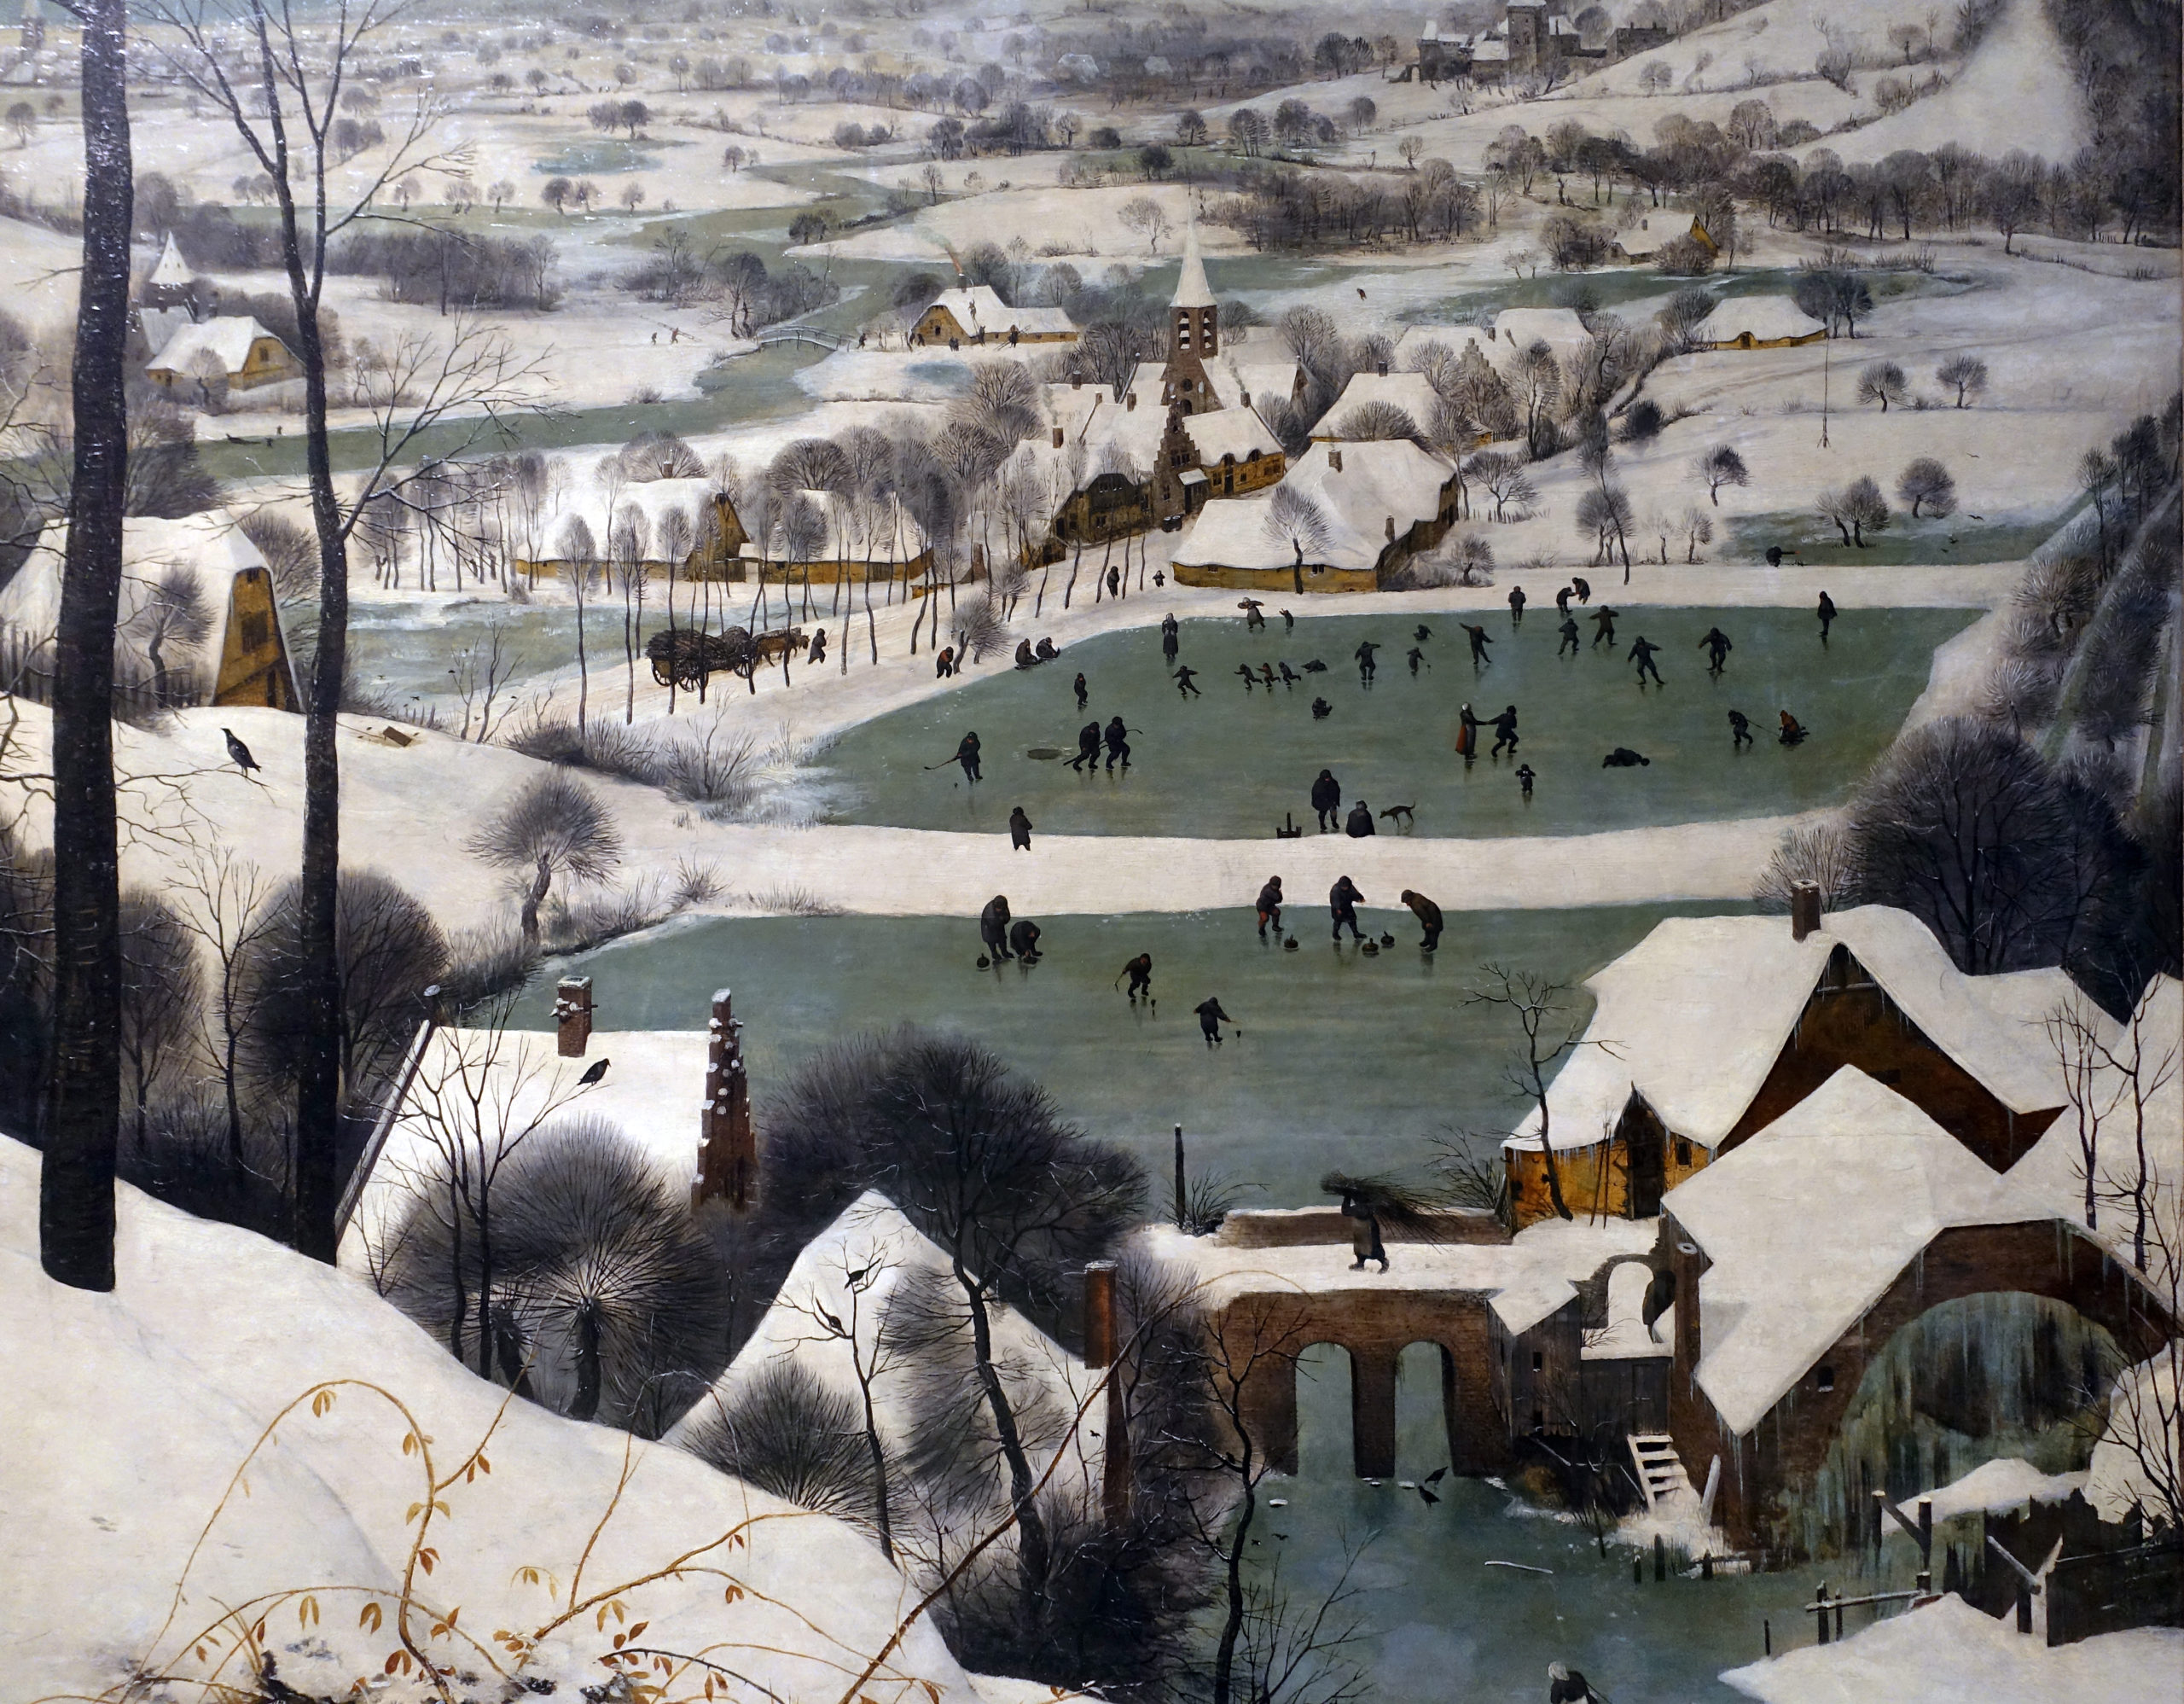 oil painting of a wintry scene